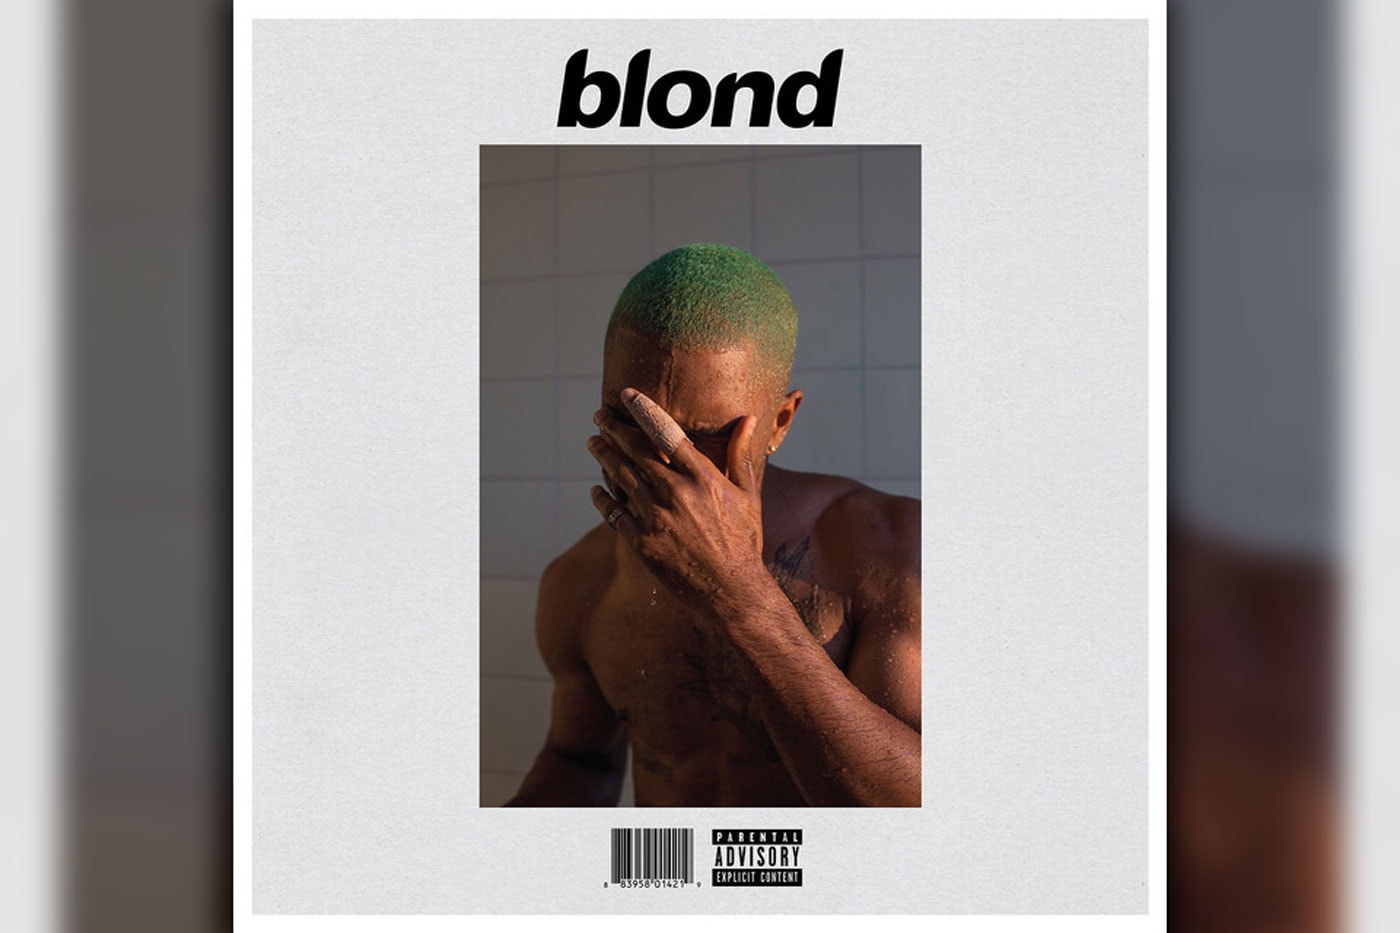 5 Songs From Frank Ocean’s 'Blonde' Debut On Hot 100 Chart